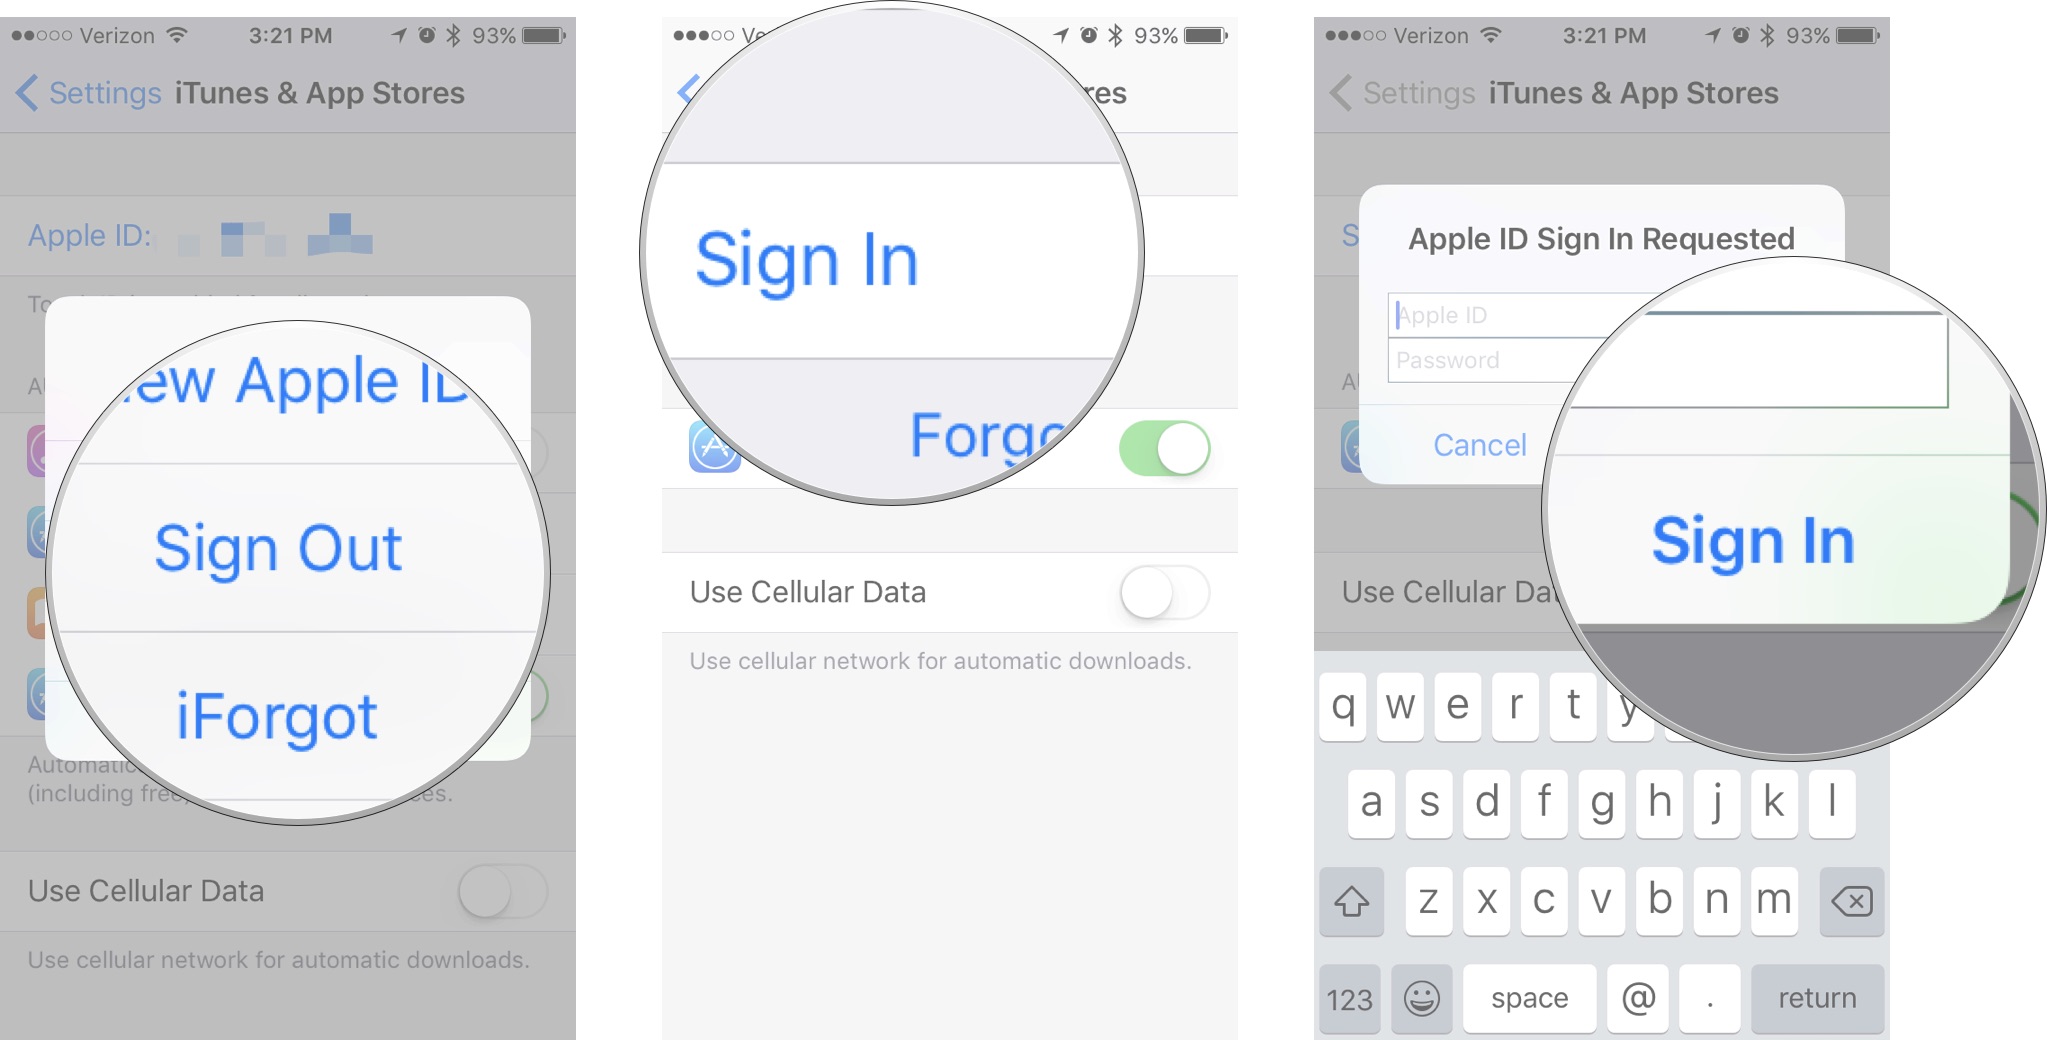 Tap Sign out, then tap Sign In, then enter an Apple ID and Password and tap Sign In